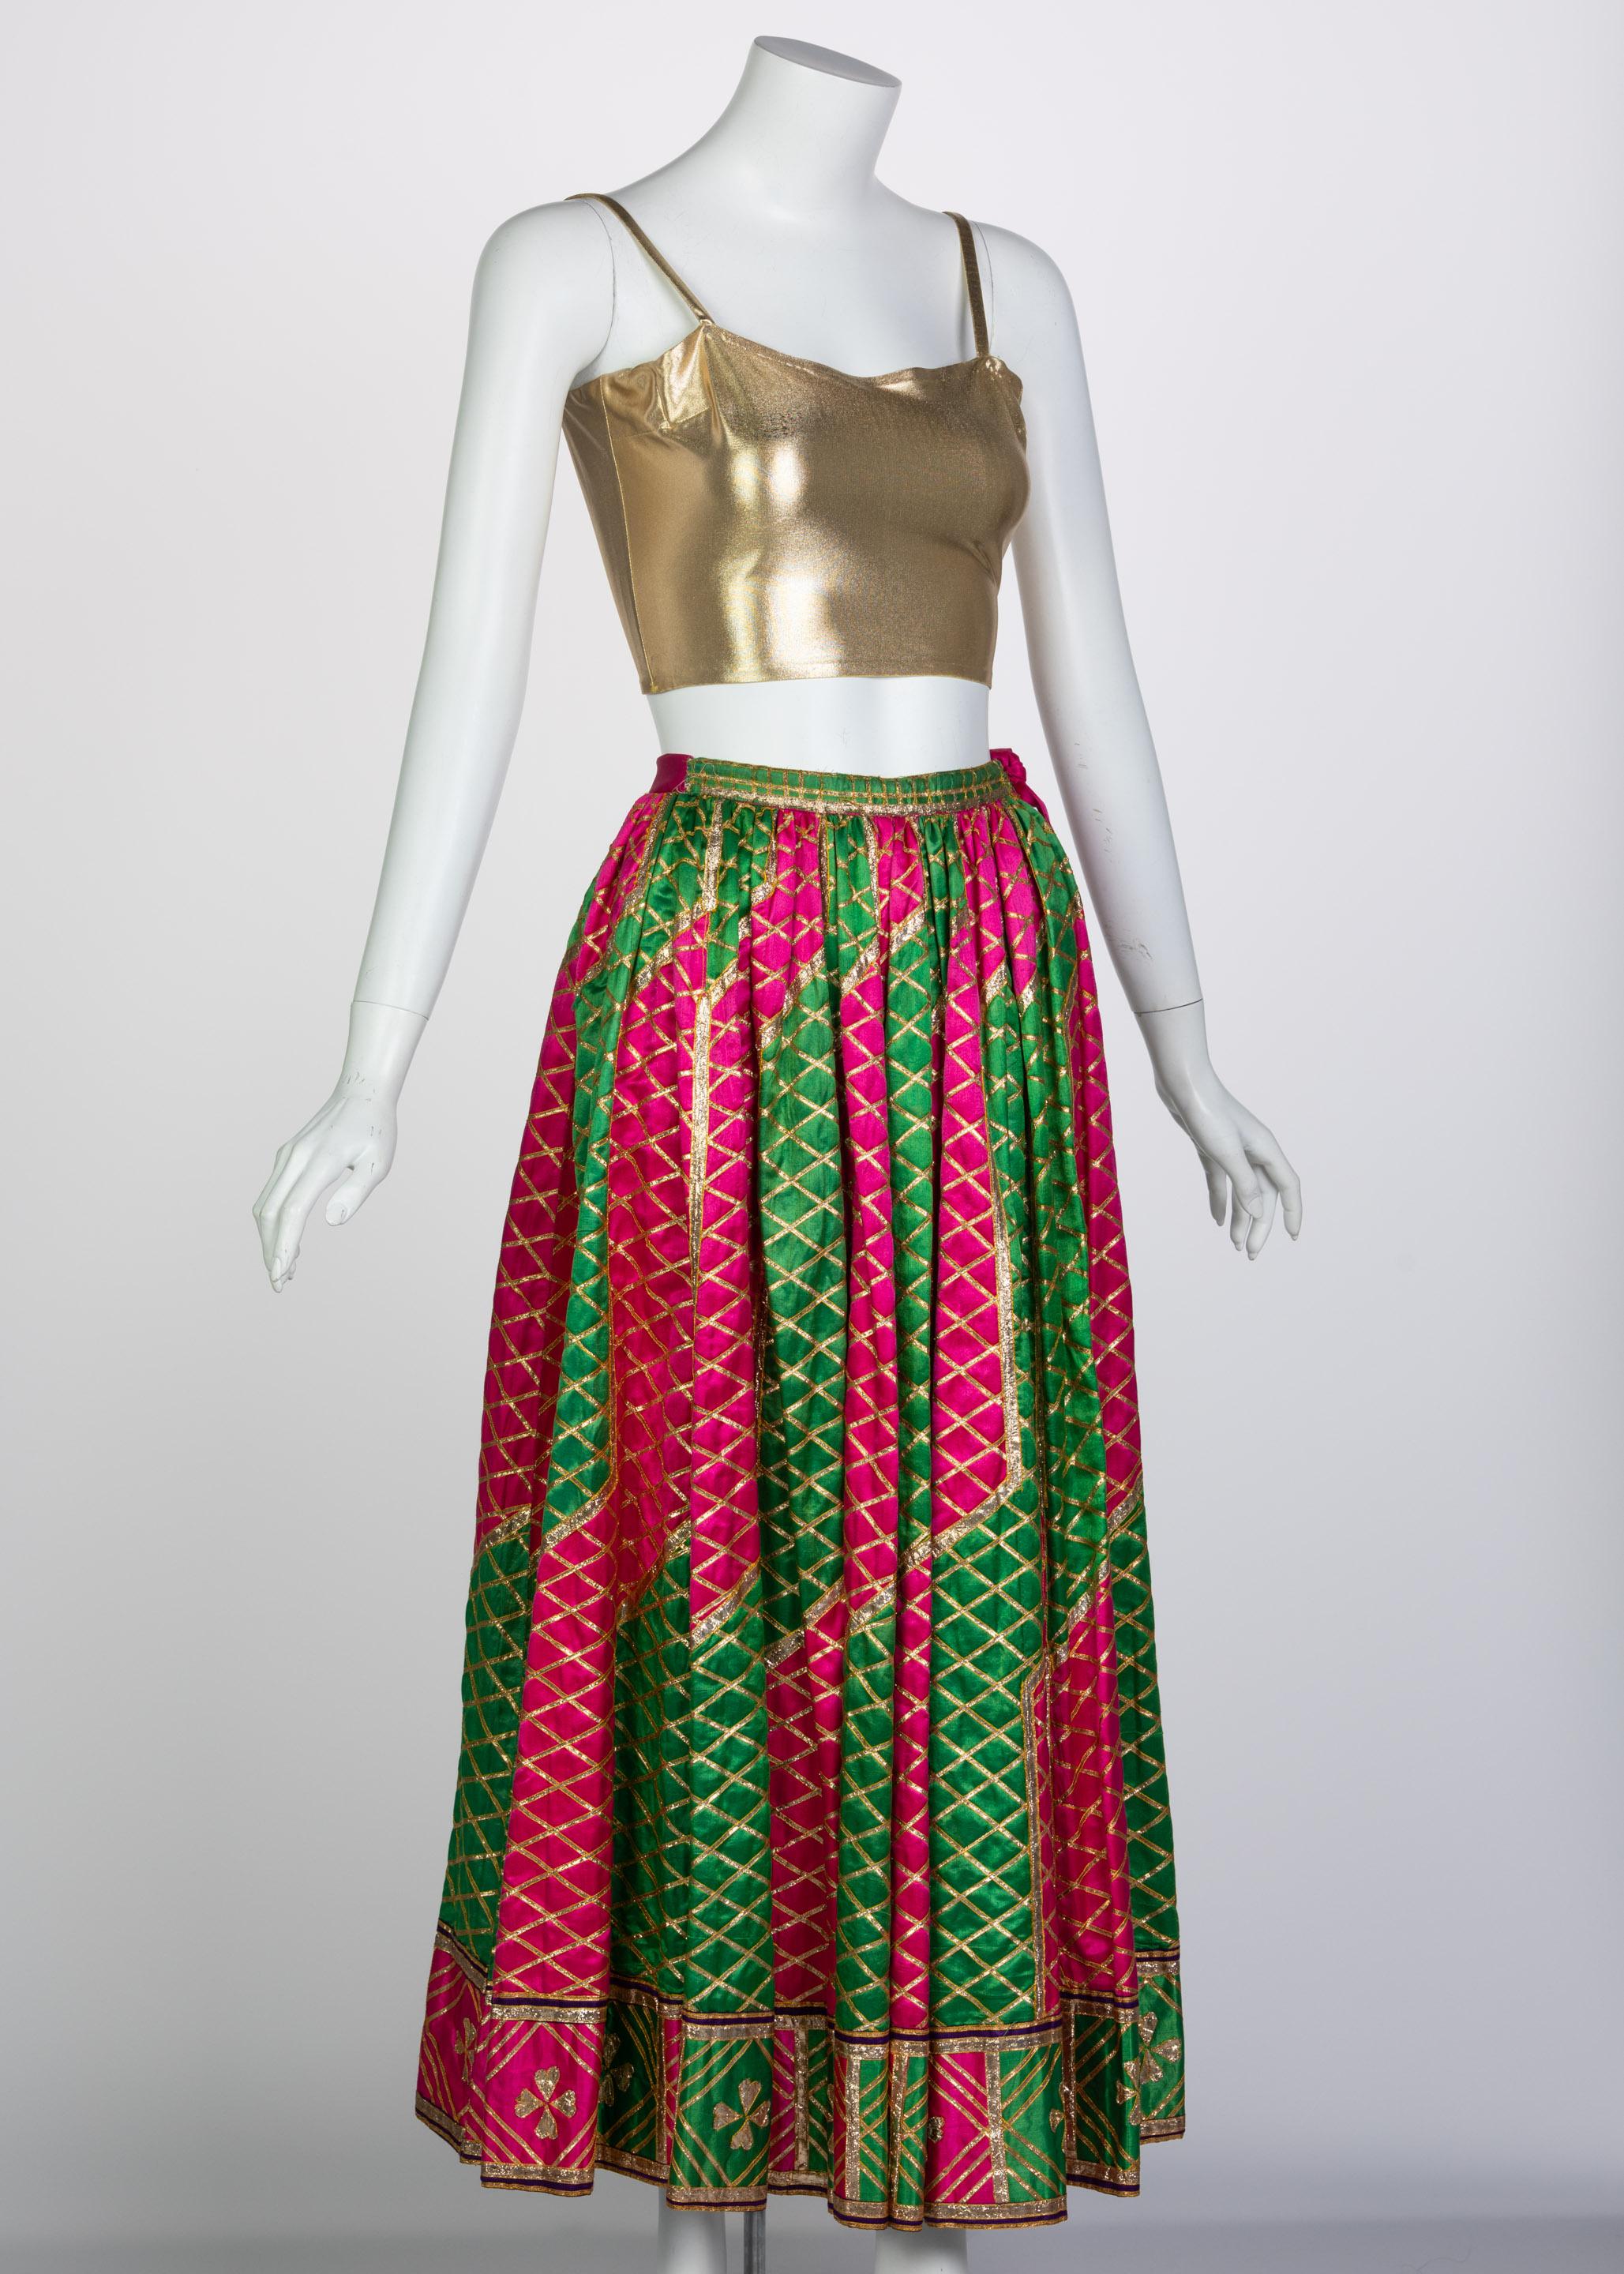 Lanvin Haute Couture Gold Lame Top & Green Pink Peasant Skirt Ensemble, 1977 In Excellent Condition In Boca Raton, FL